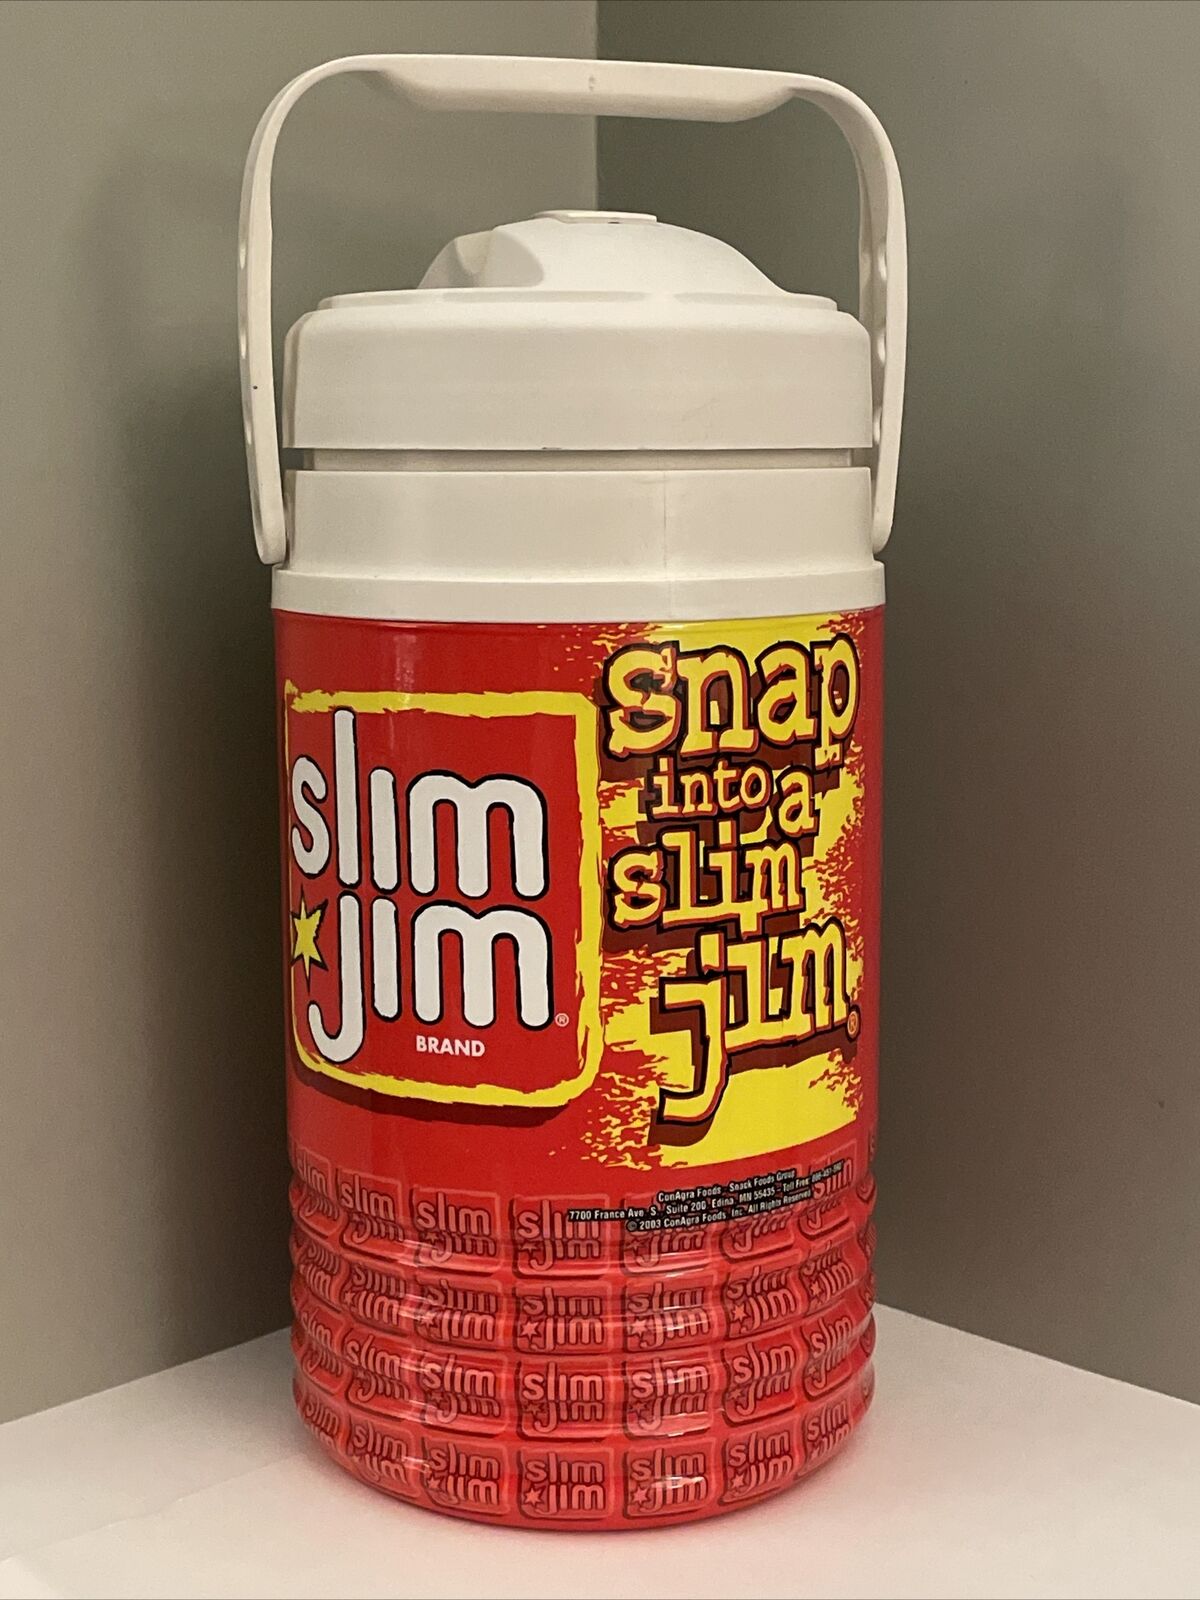 Vintage Igloo Snap Into a Slim Jim Thermos Cooler 1/2 Gallon - 2003 Red Yellow